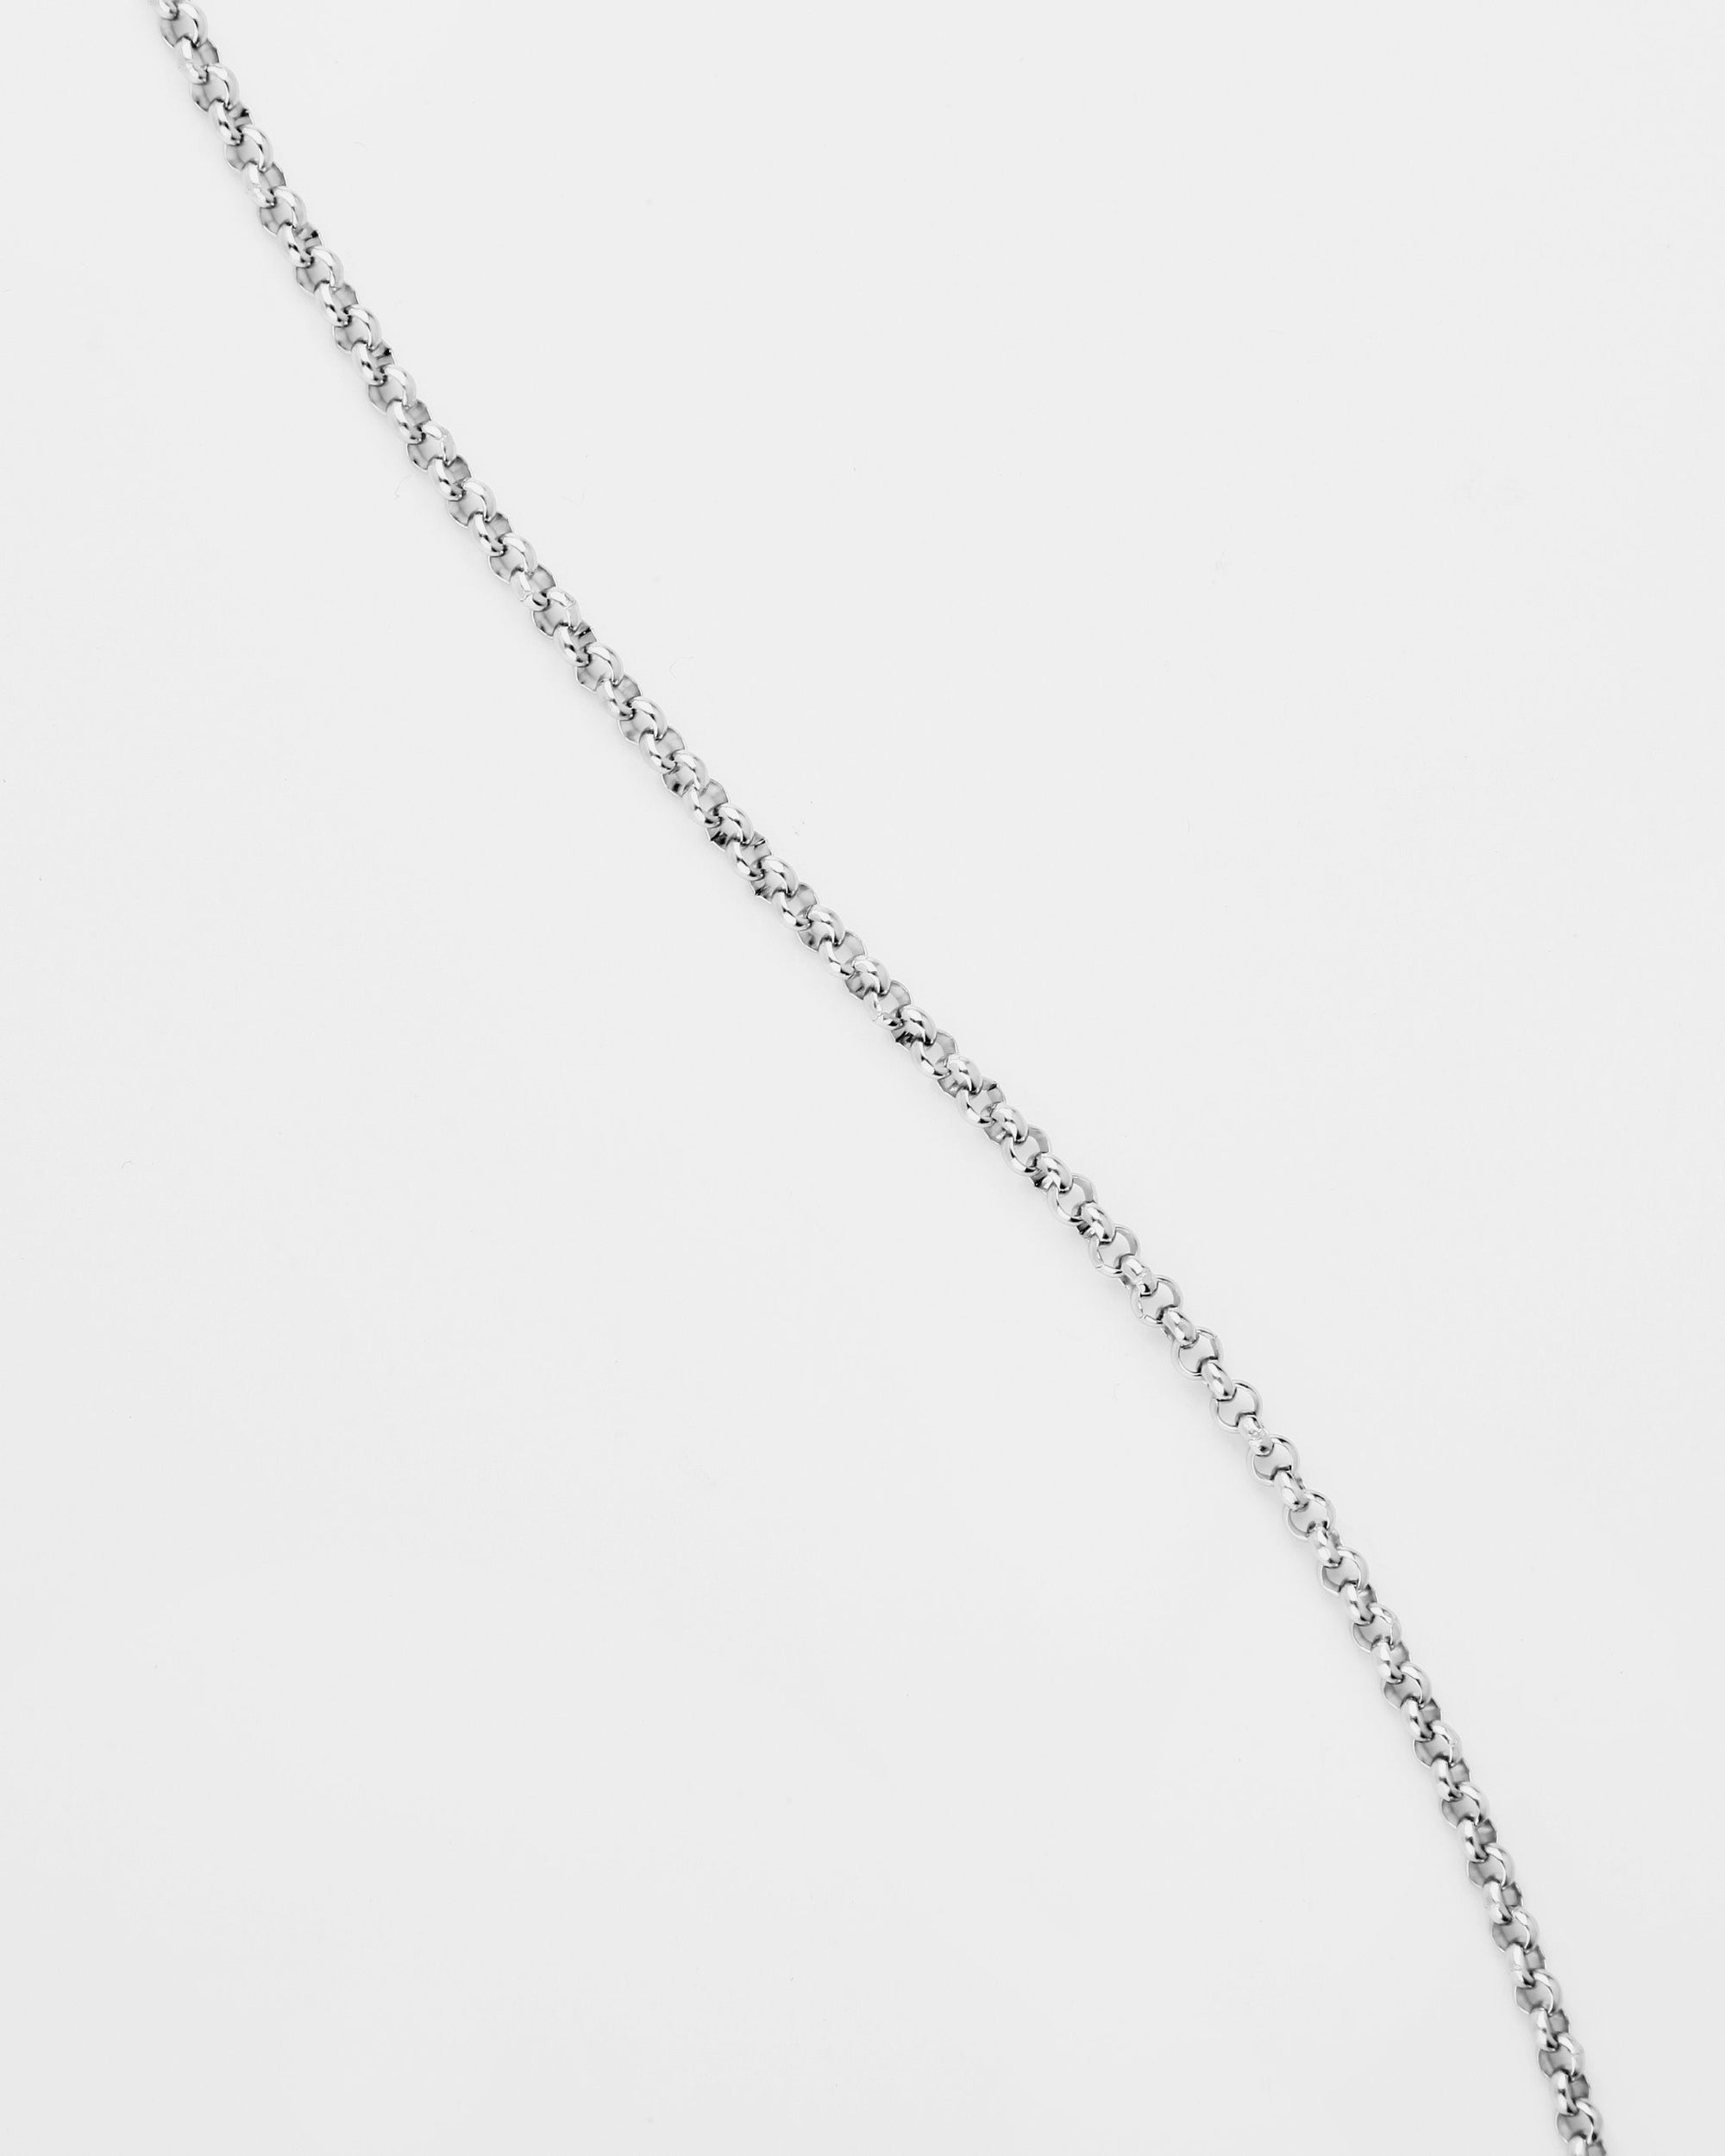 A close-up image of a For Art&#39;s Sake® Florentina Glasses Chain against a plain white background. The chain appears lightweight with small, round links, arranged diagonally across the image.